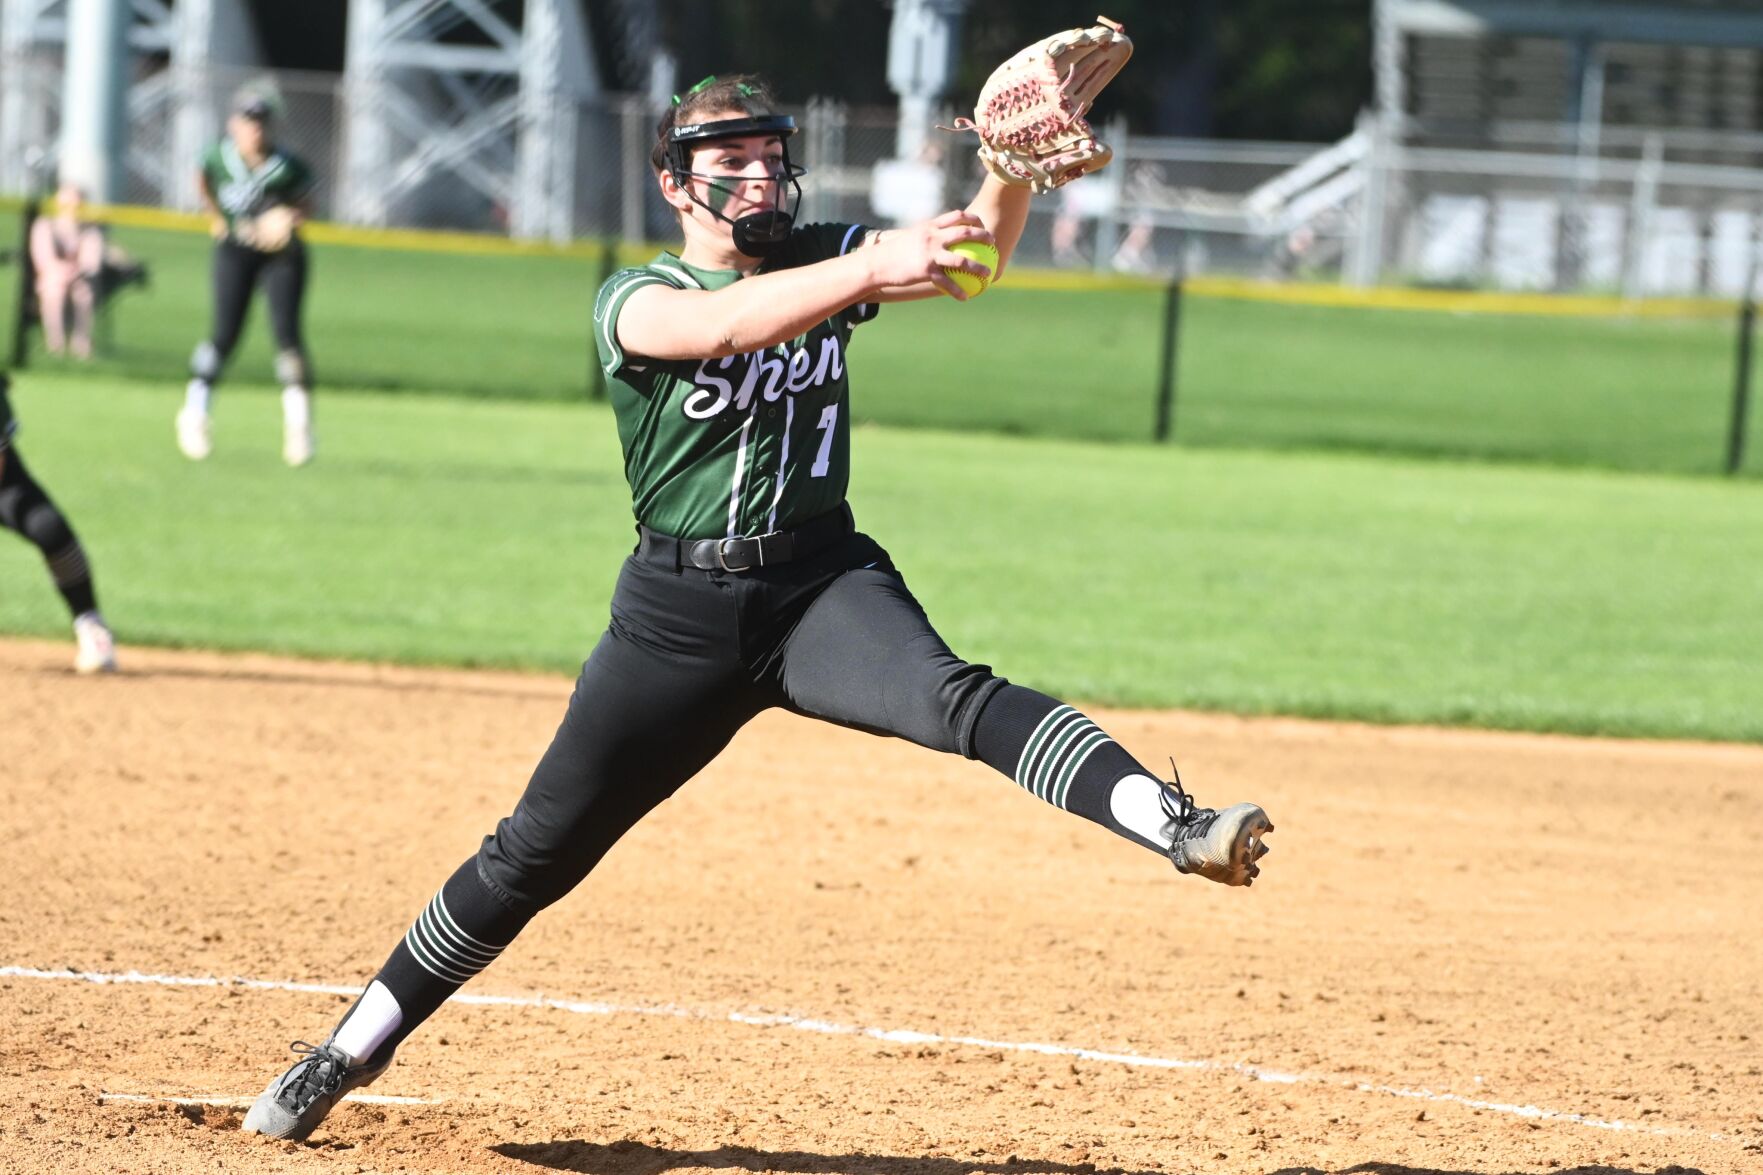 Bre Hayes No-Hits Ballston Spa, Leads Shenendehowa to 1-0 Victory in Section 2 Softball Clash